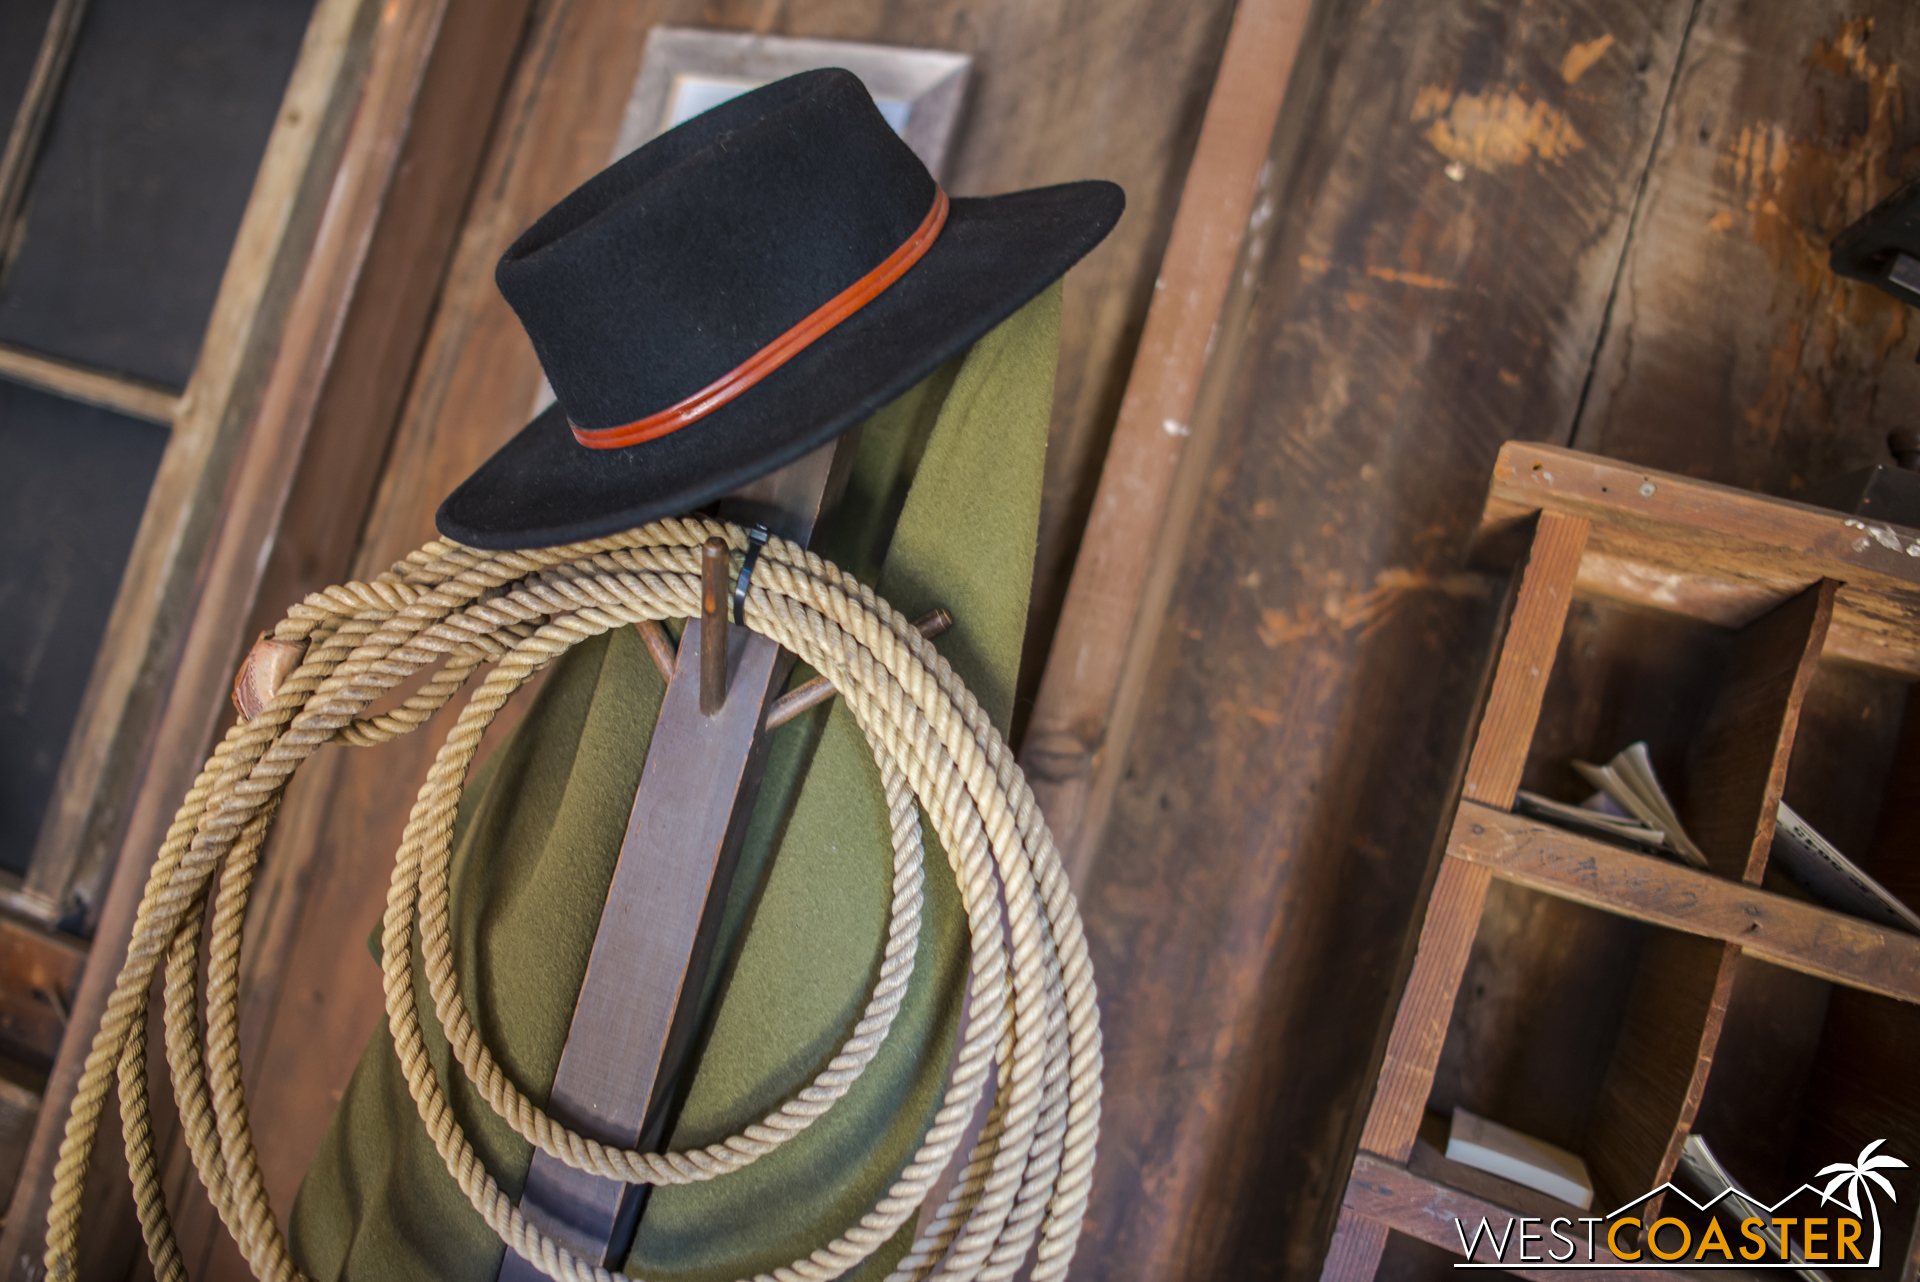  A hat and lasso hang on a rack for Sheriff Wheeler's use when needed. 